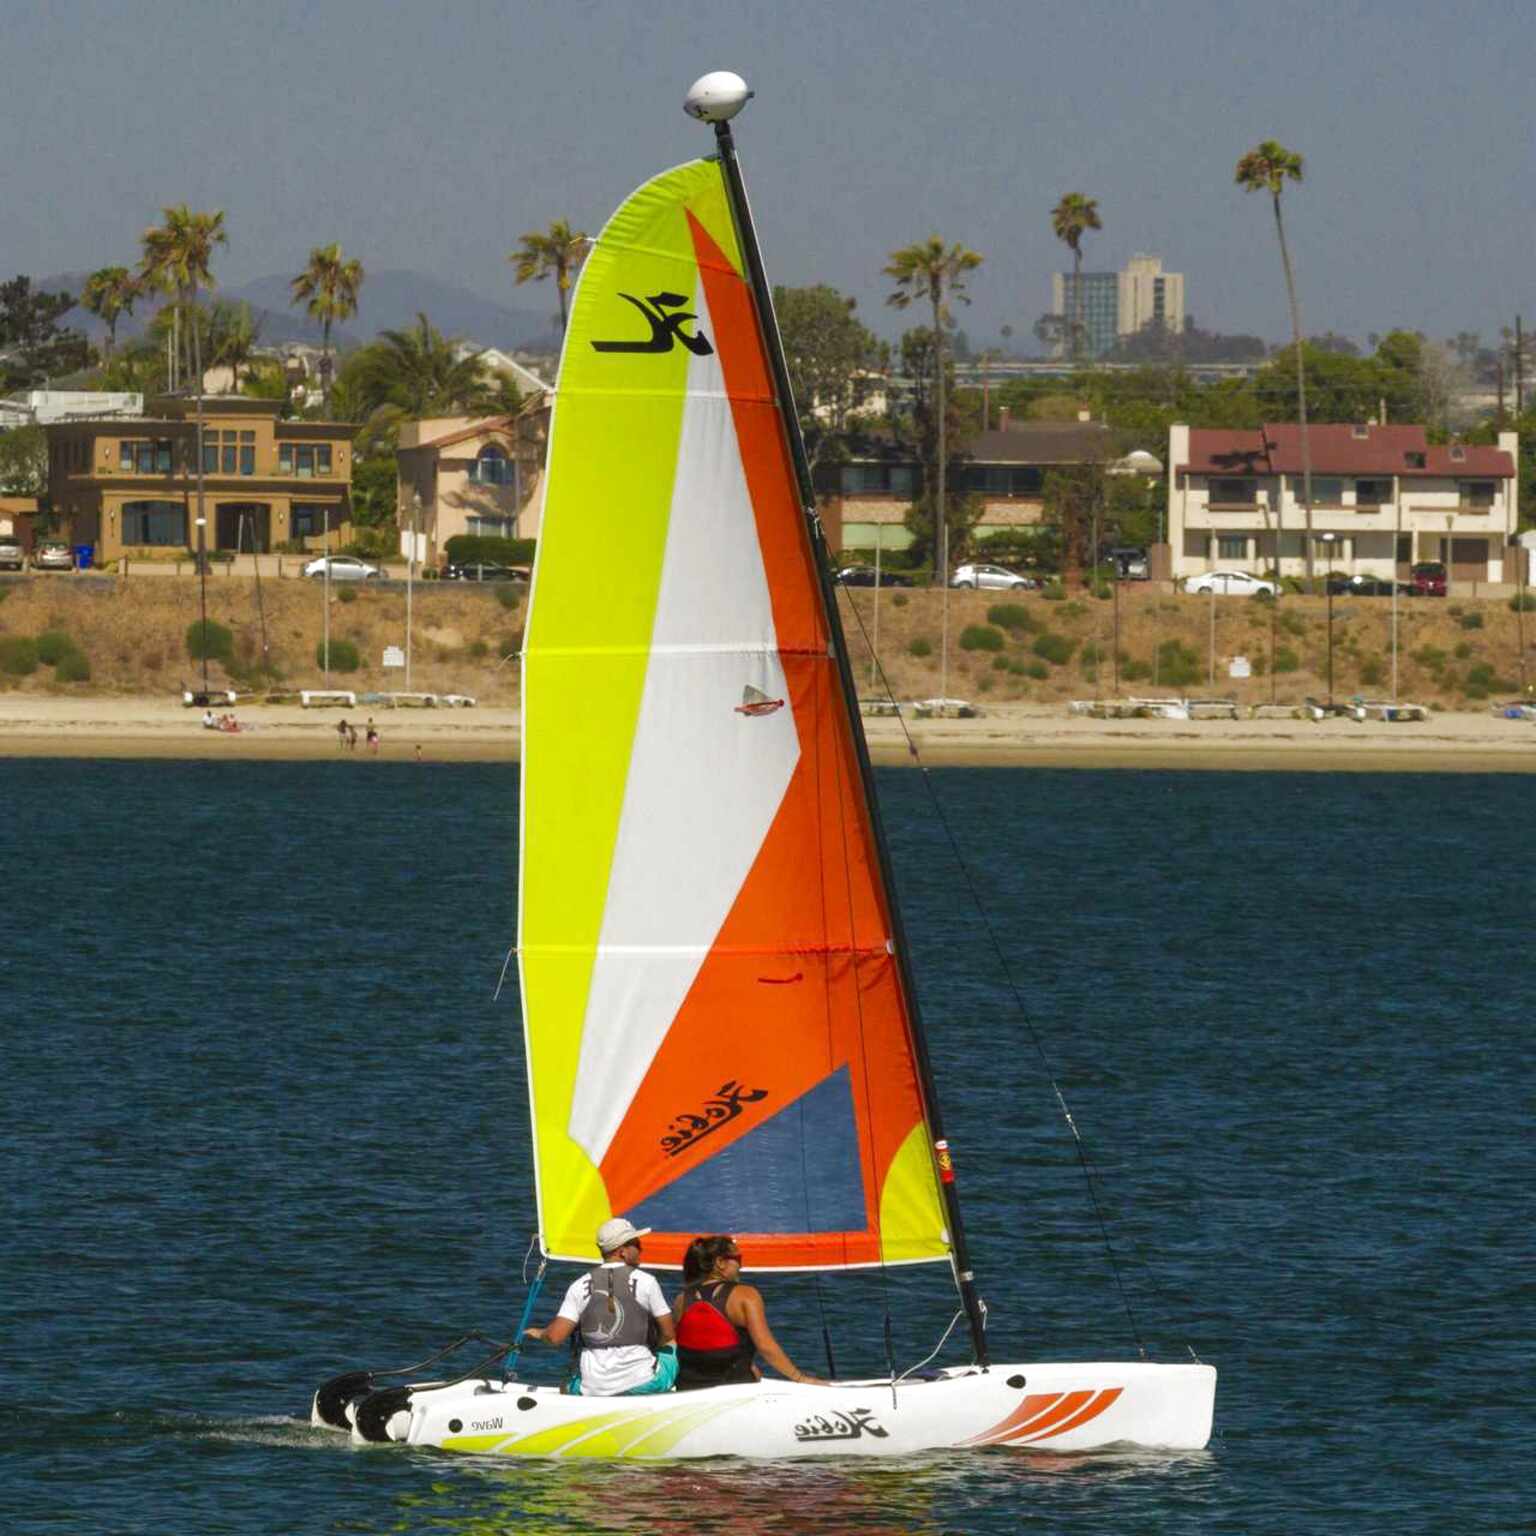 Hobie Cat for sale in UK 58 secondhand Hobie Cats